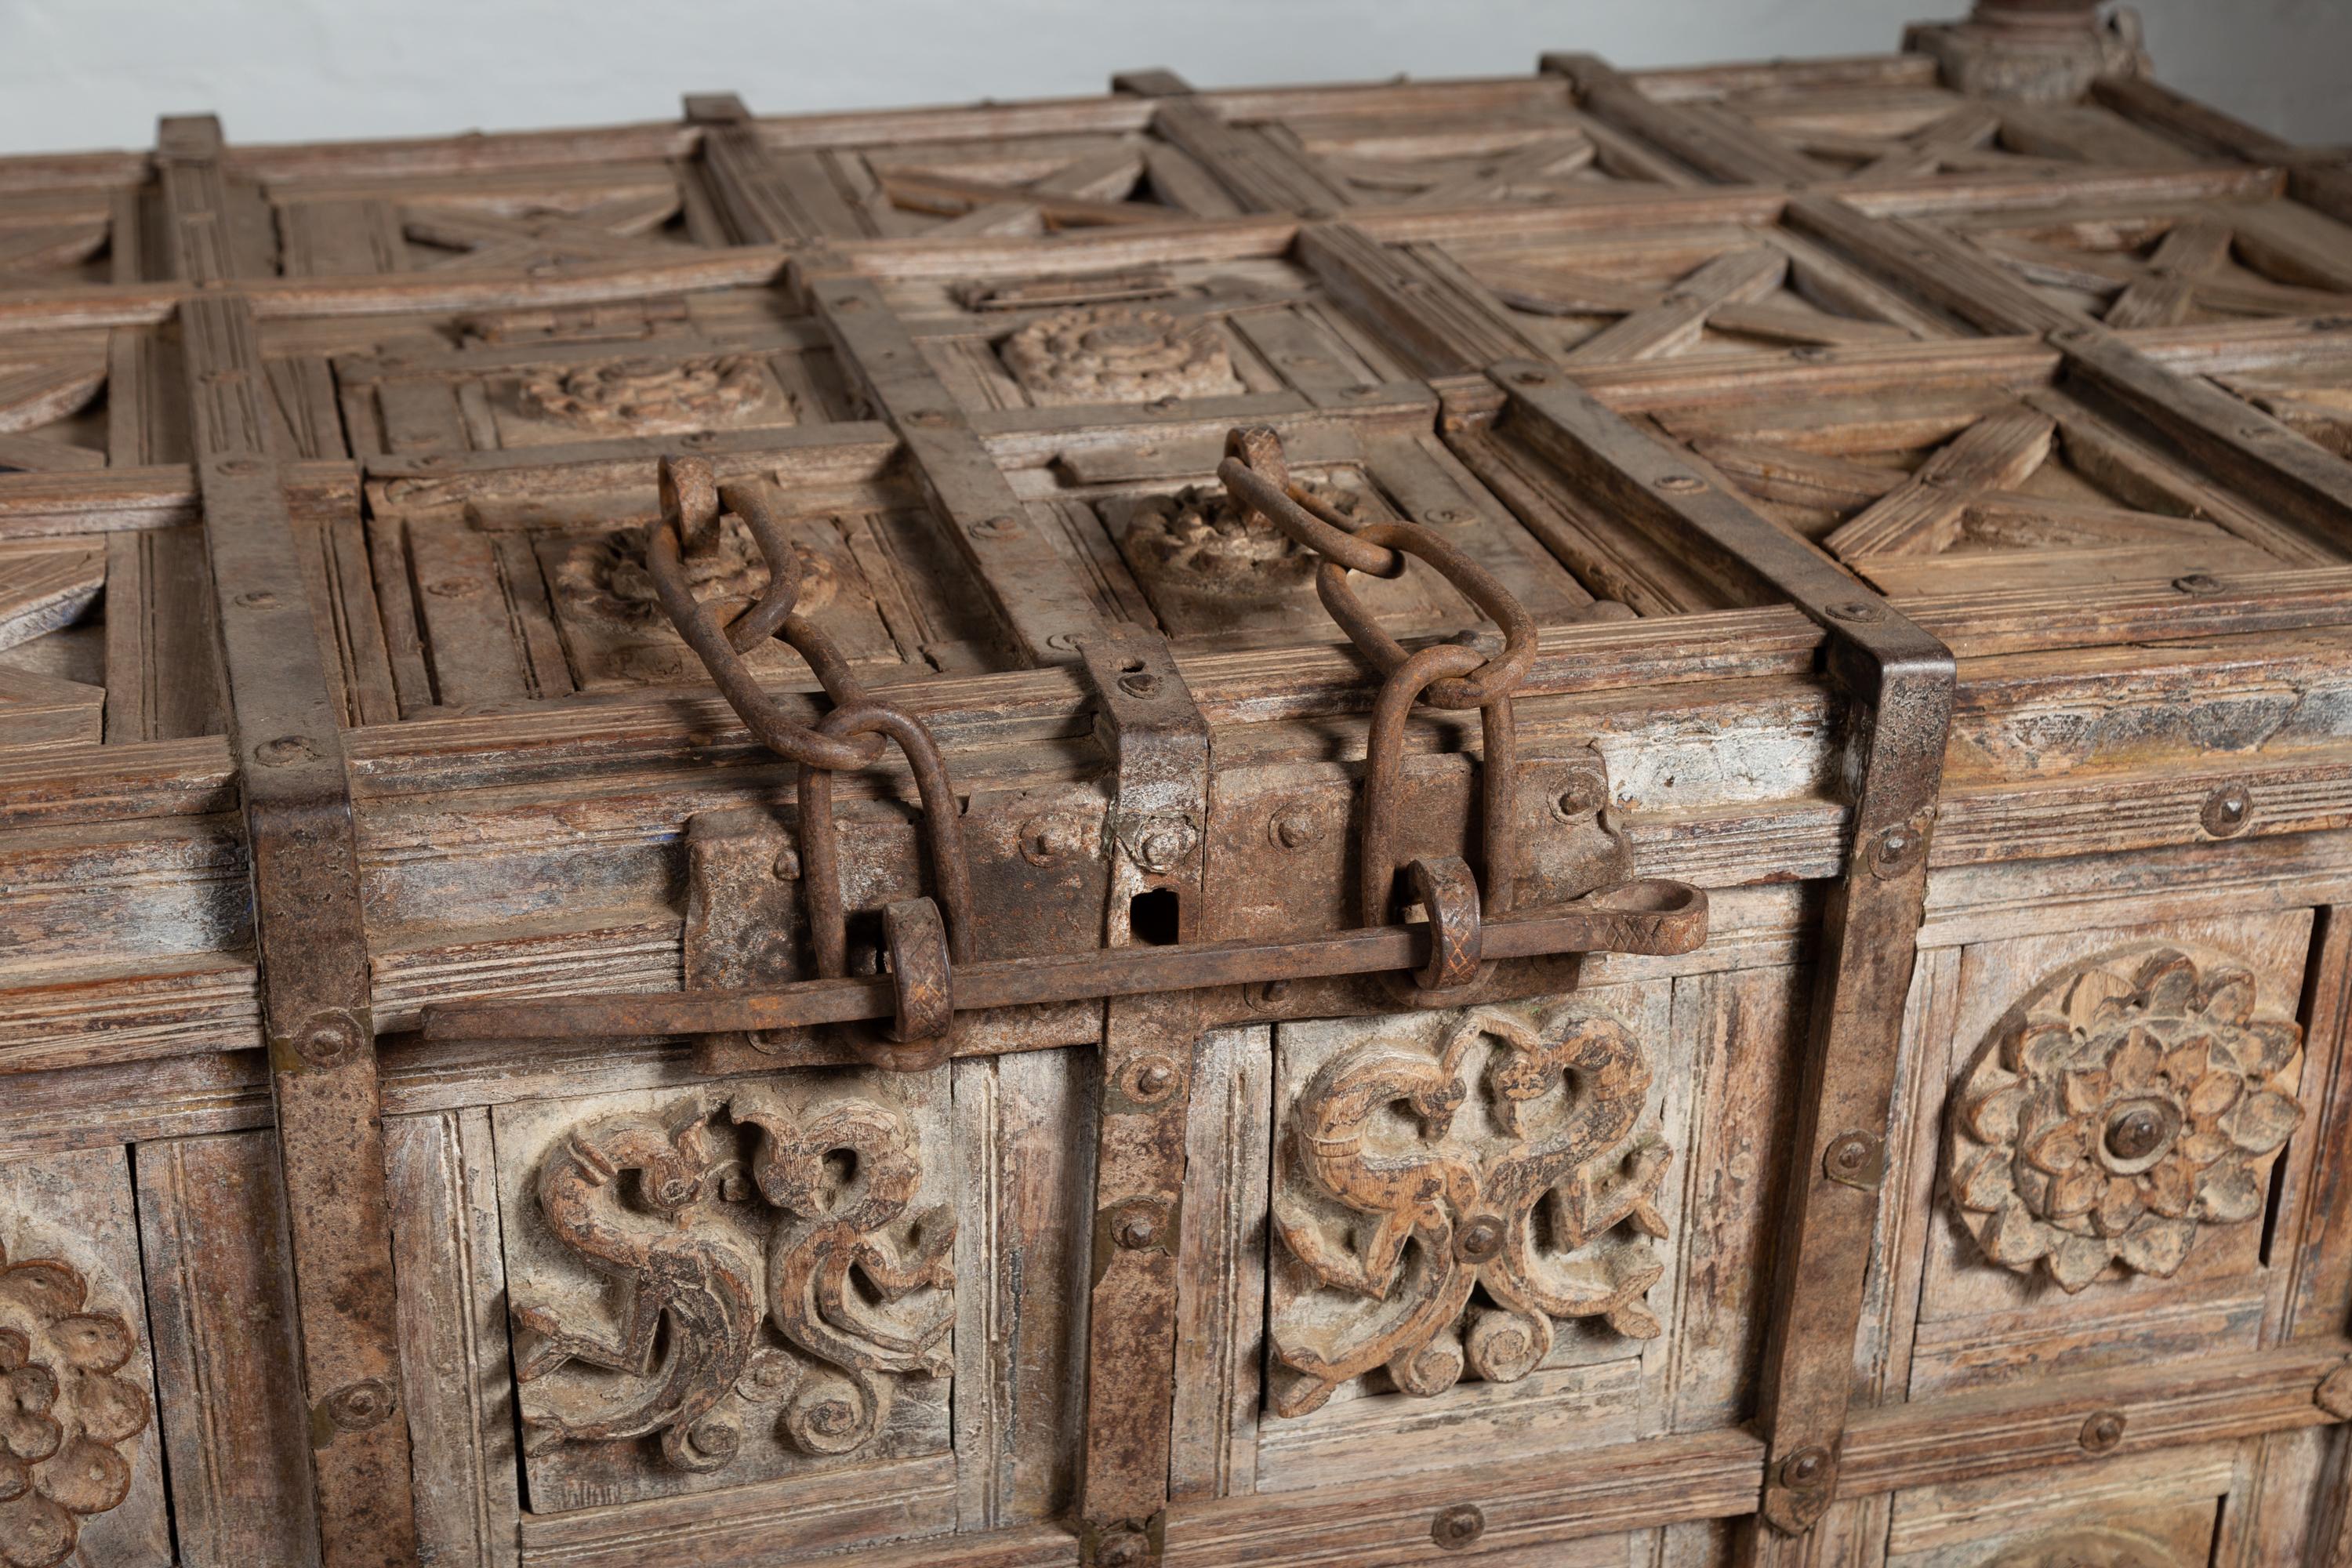 Oversized Indian Treasure Chest with Raised X Patterns, Rosettes and Animals 13